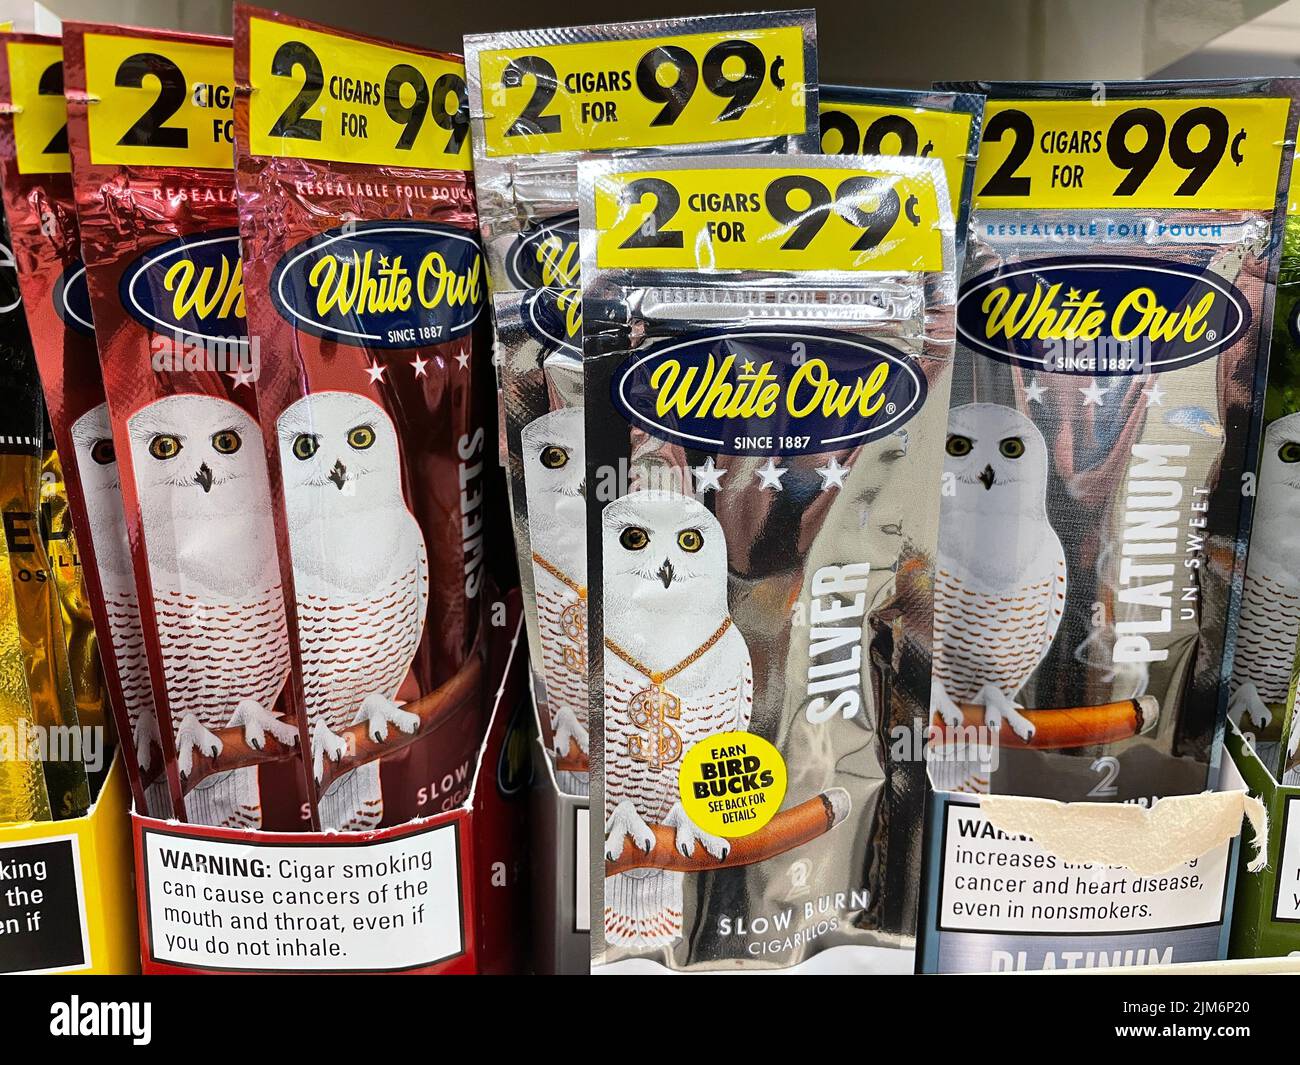 Grovetown, Ga USA - 05 03 22: Flavored Cigars blunts in a retail store White Owl Stock Photo